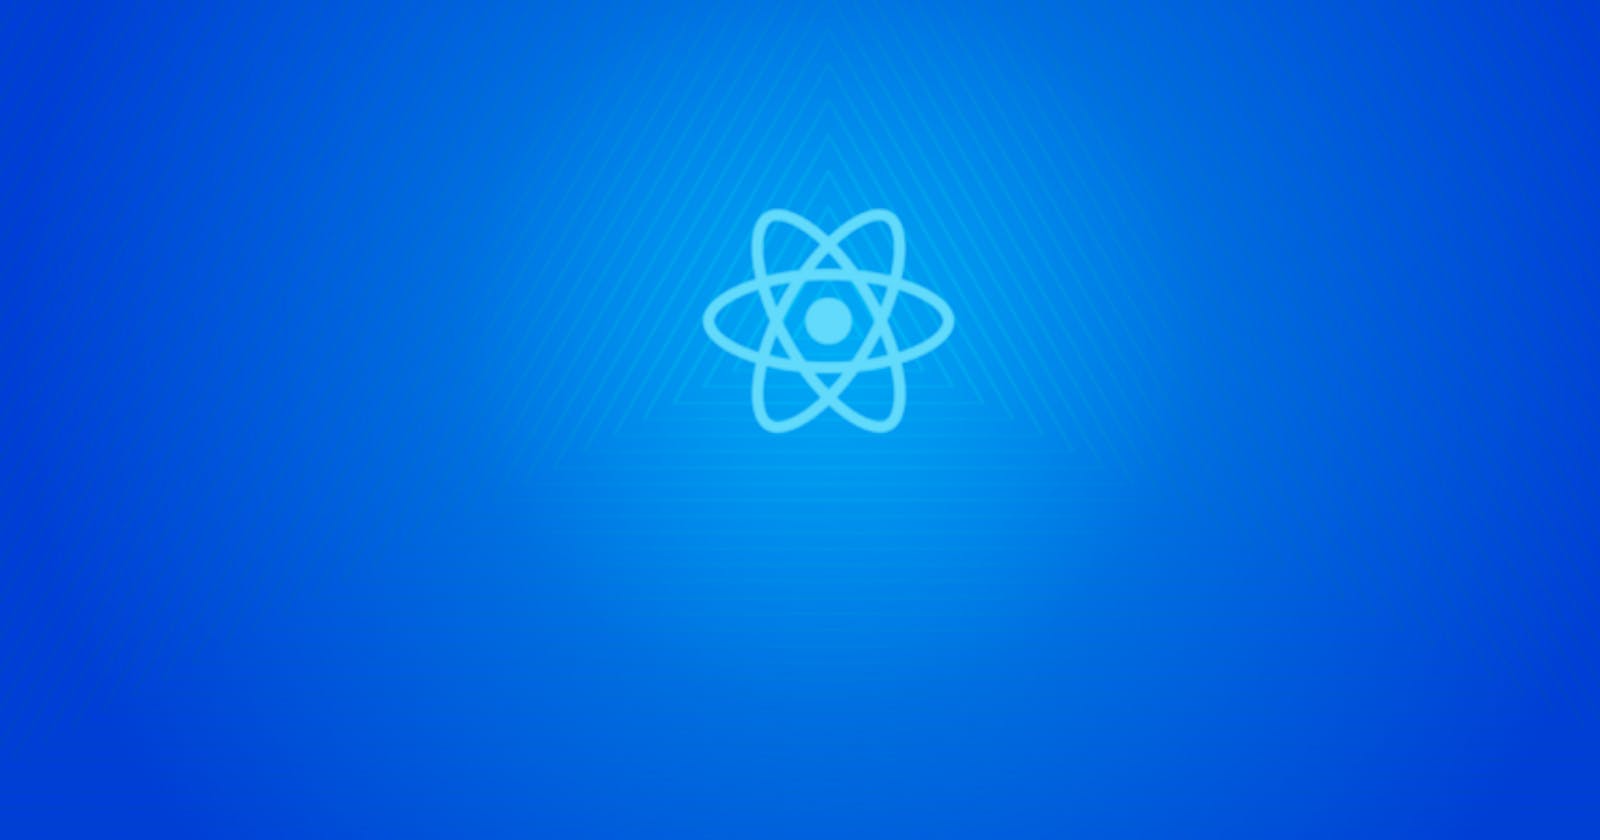 3 React Component Patterns Every React Developer Should Know